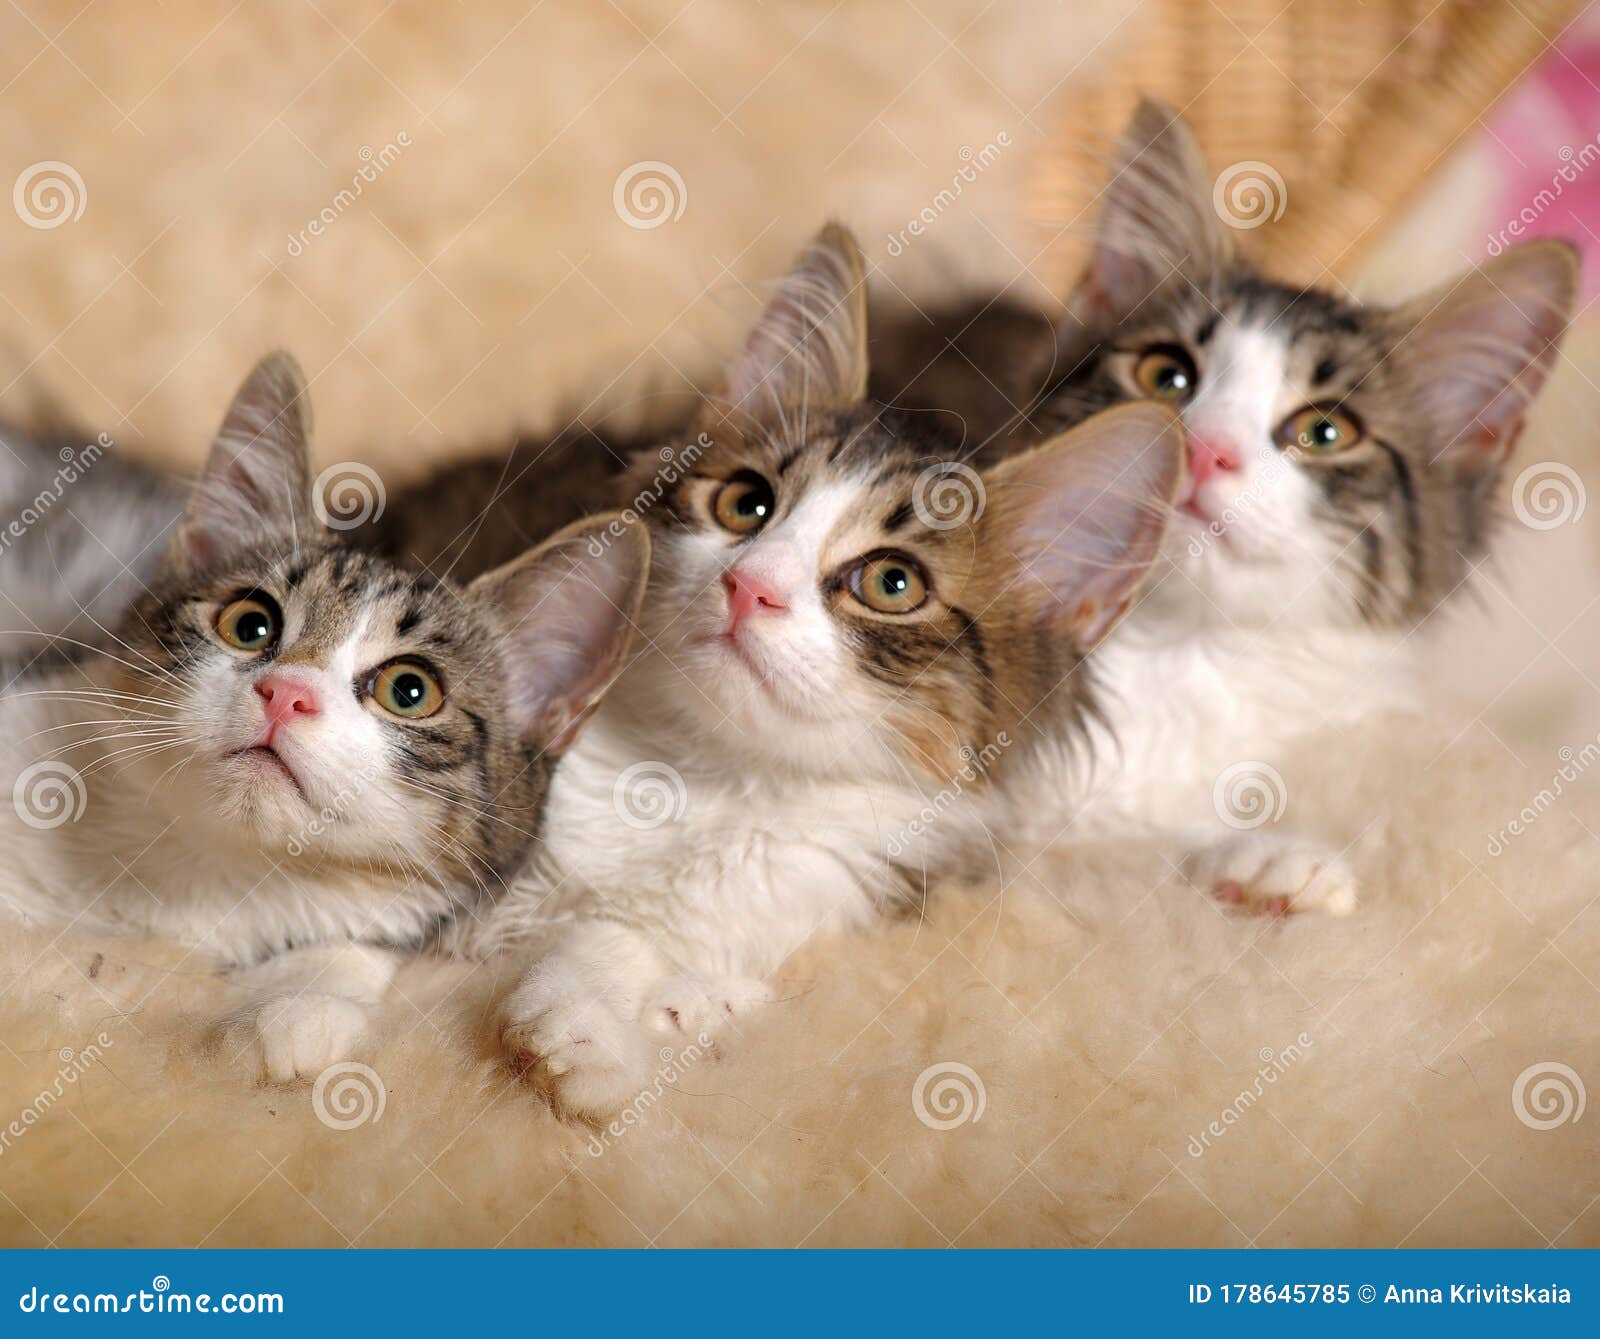 Three cute fluffy kittens stock image. Image of eyes - 178645785